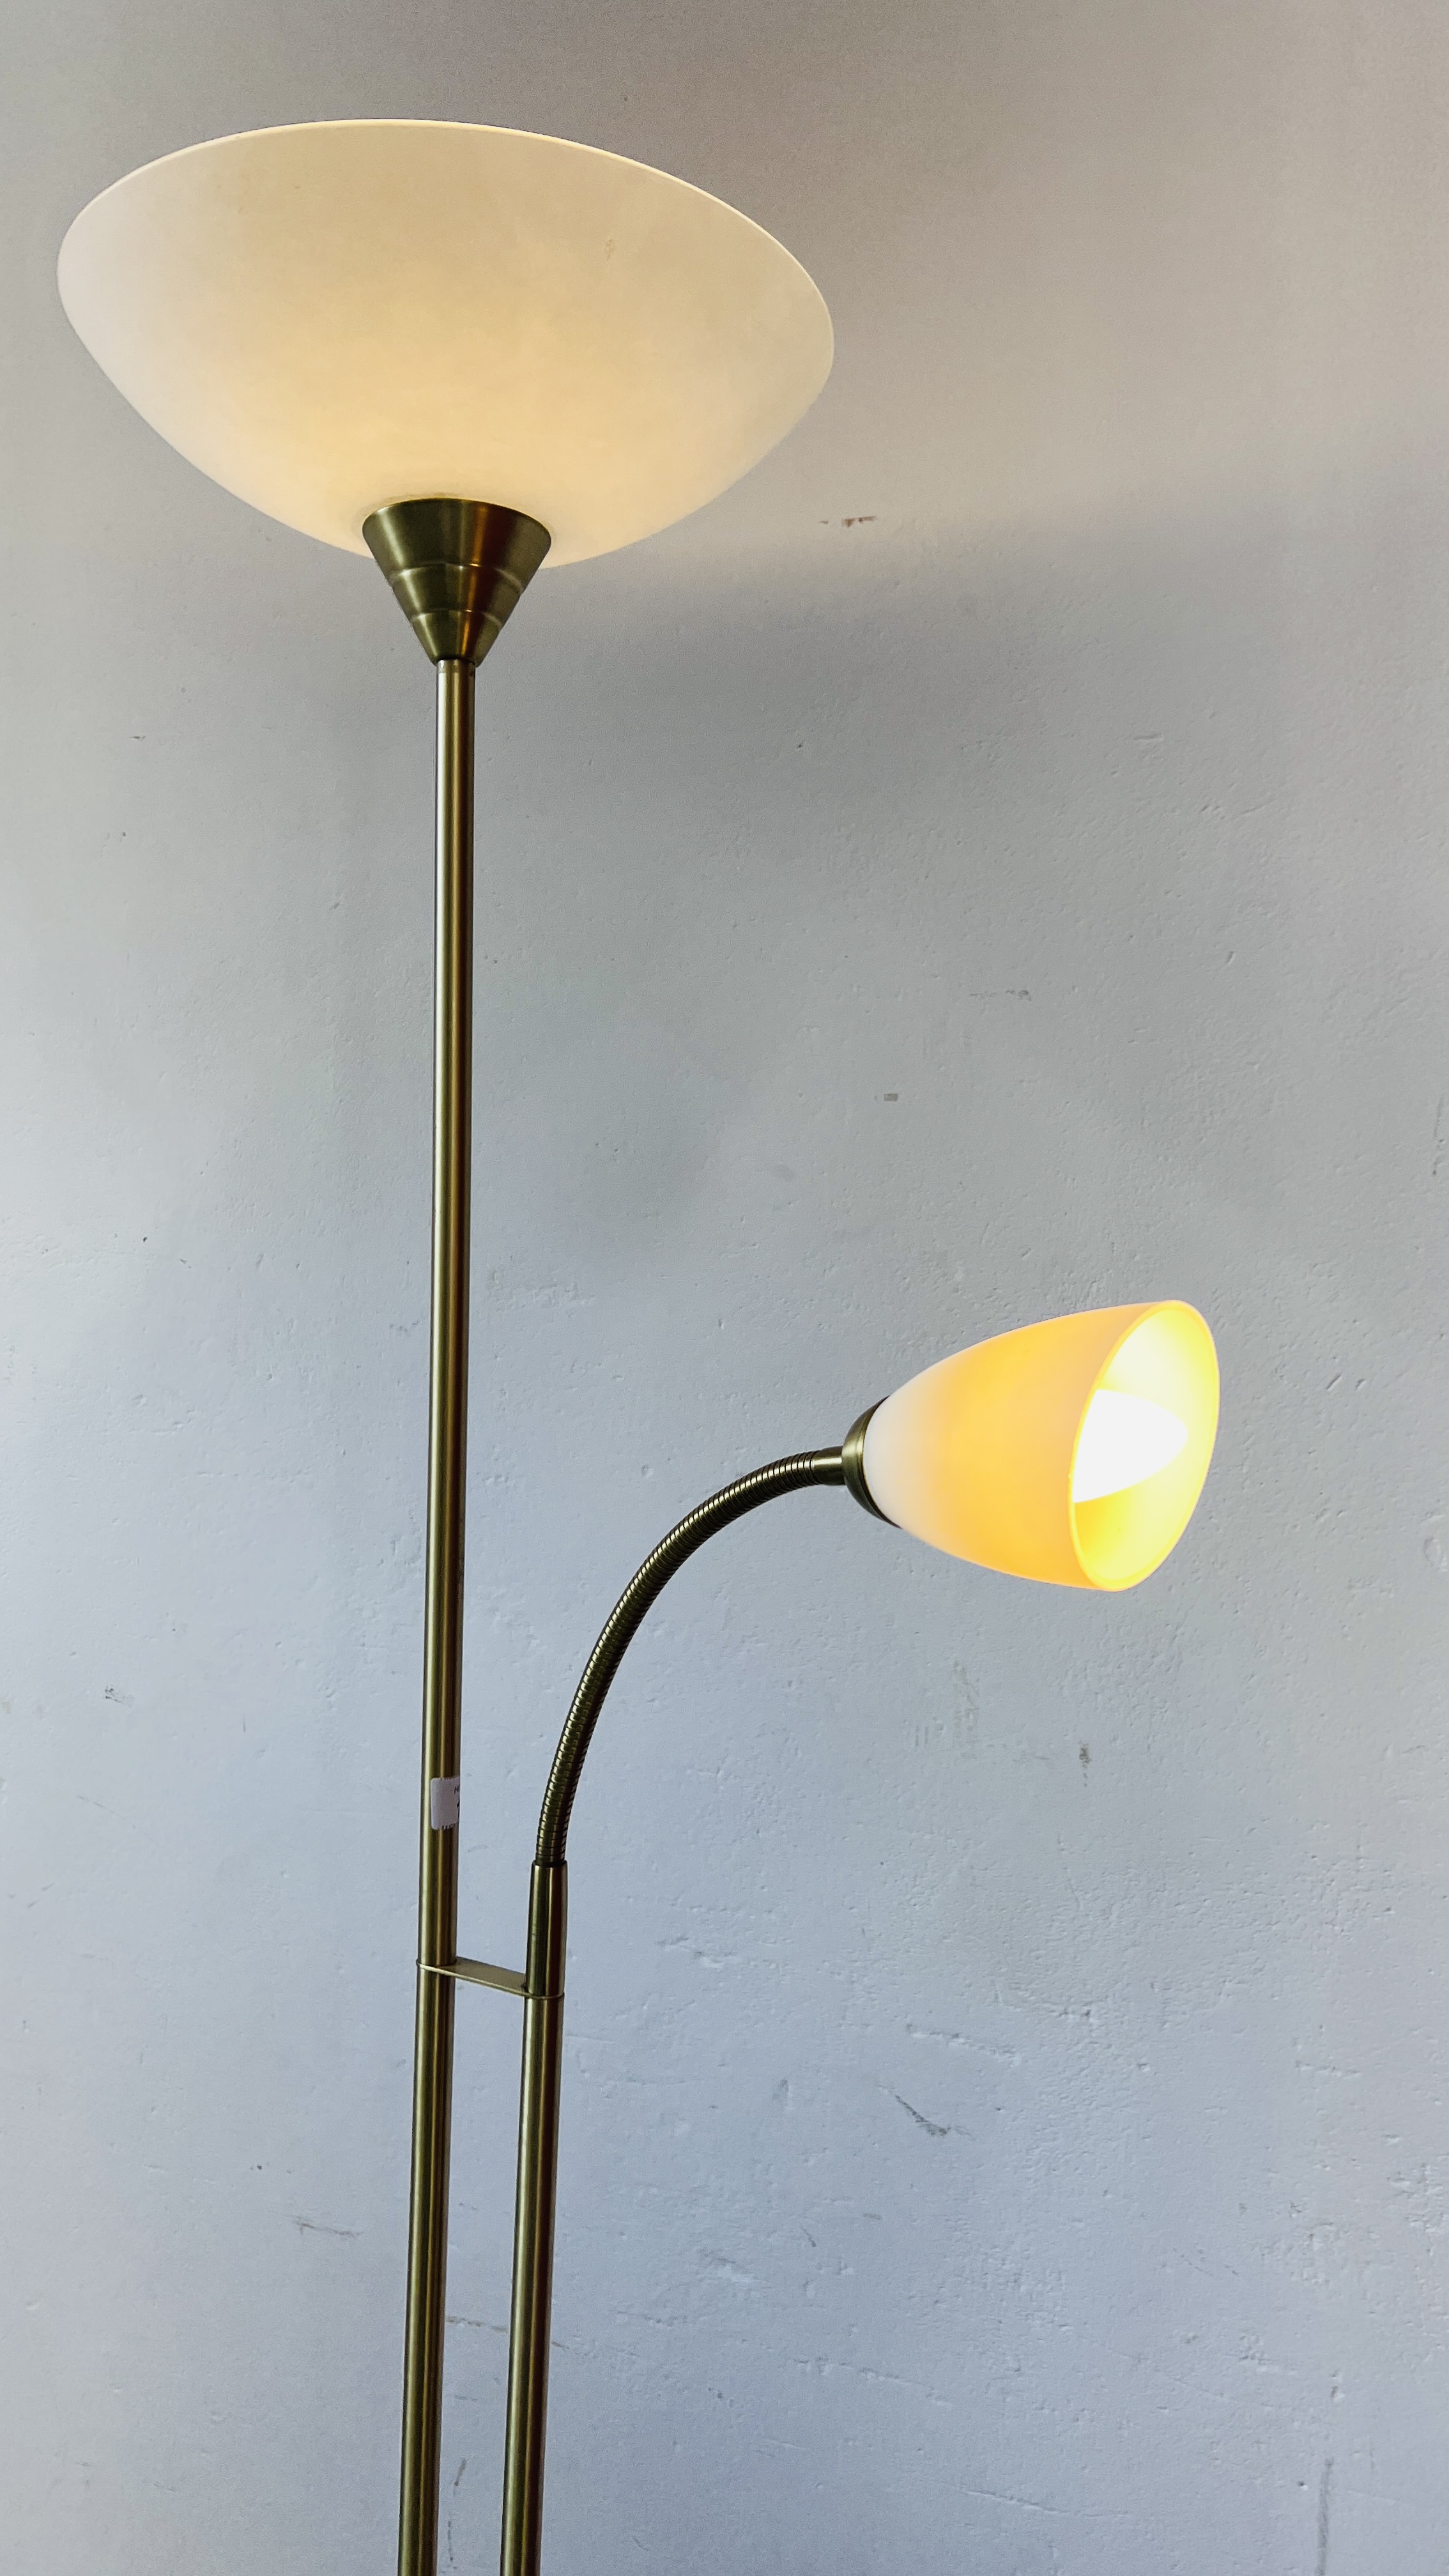 A BRASS FINISH UPLIGHTER WITH ADJUSTABLE READING LIGHT - SOLD AS SEEN. - Image 2 of 5